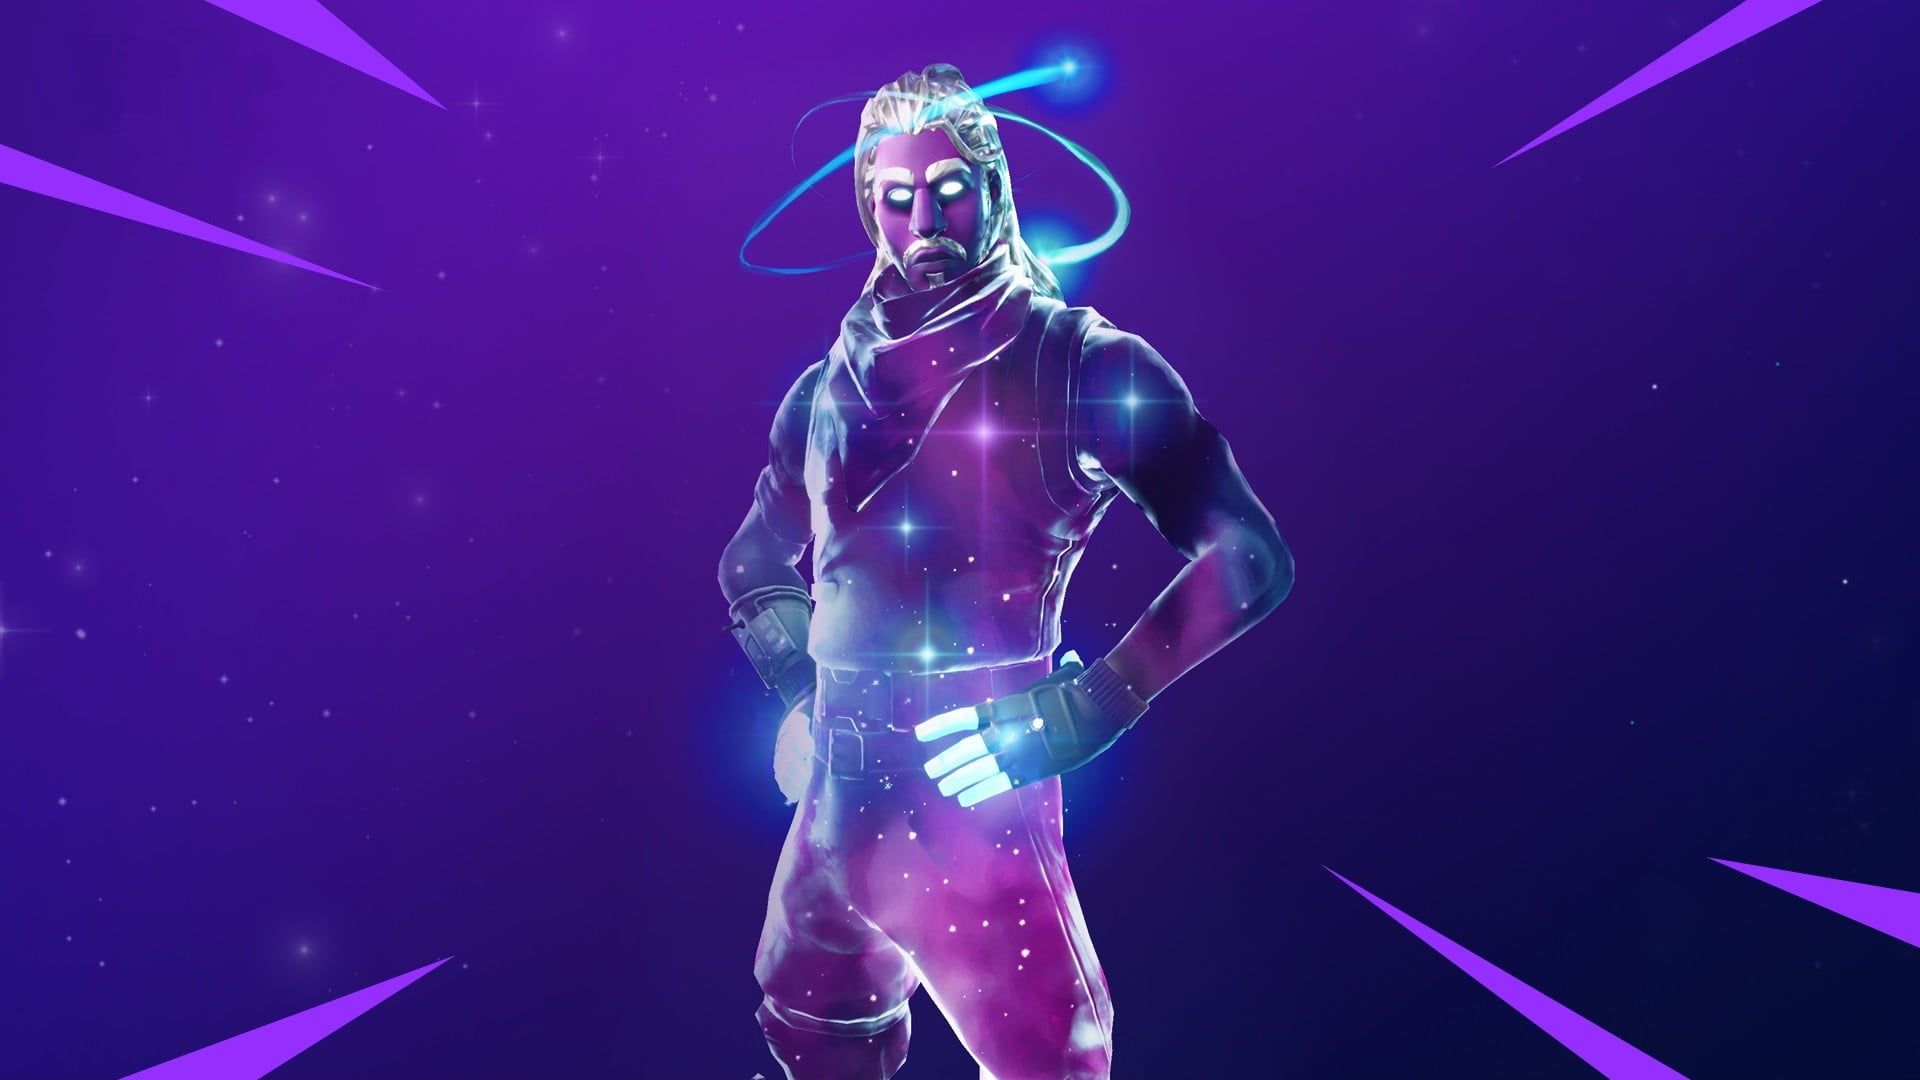 How to Unlock the Galaxy Skin in Fortnite